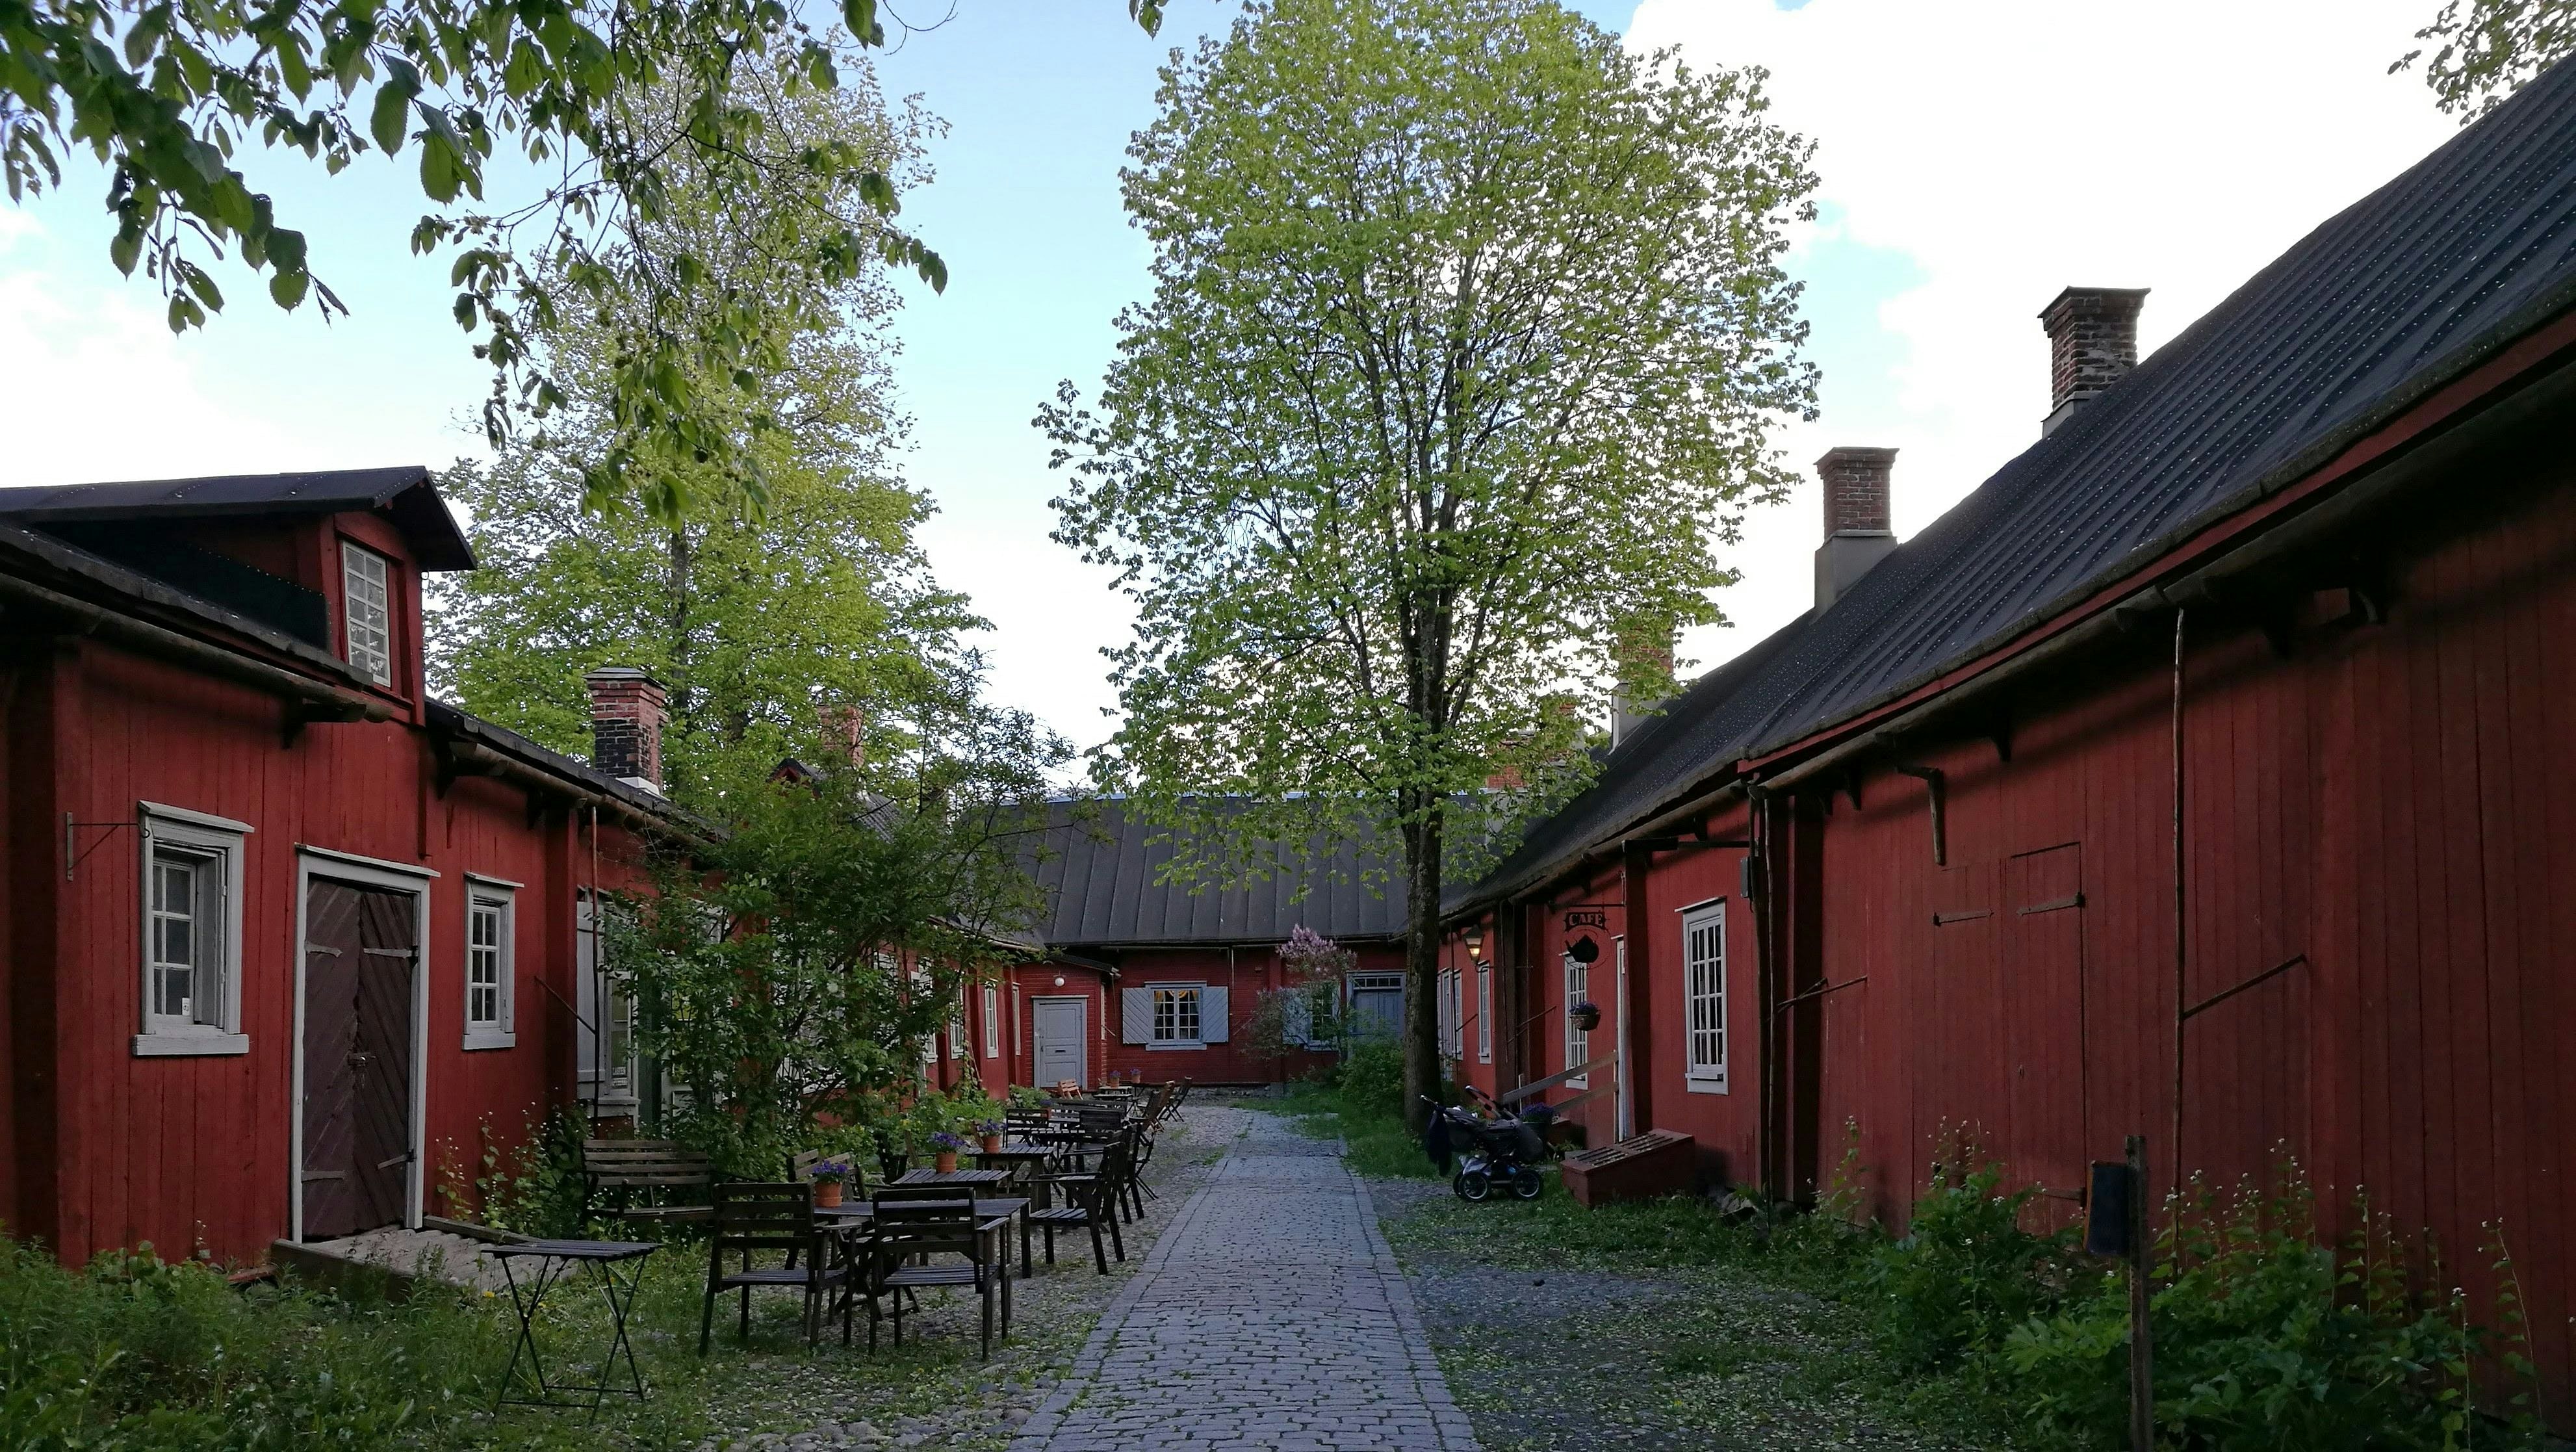 Experience Turku Highlights by Walking